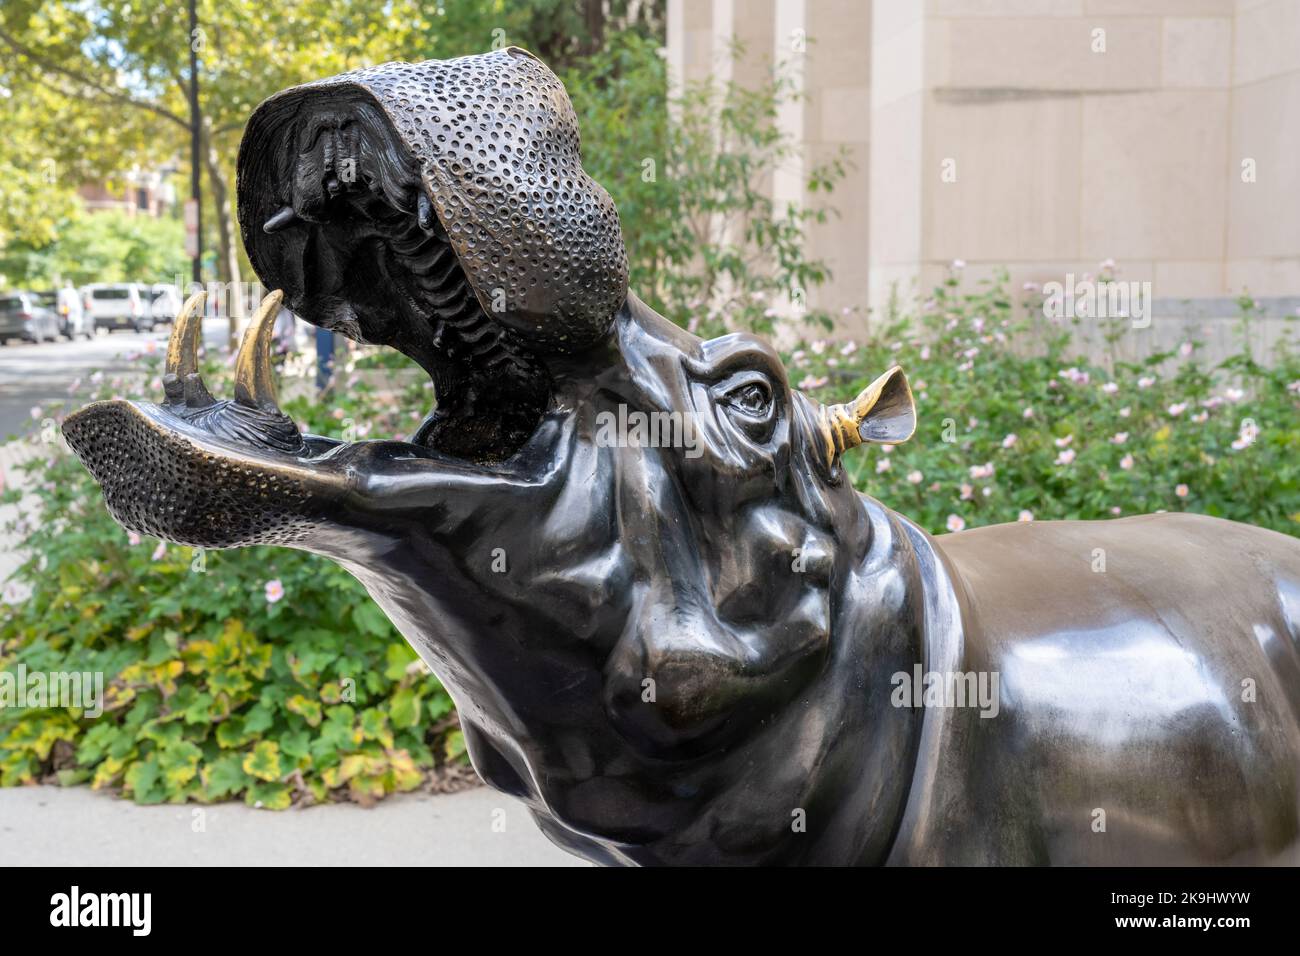 Washington, DC - Sept. 8, 2022: Close up on the head of the George Washington University bronze sculpture of a River Horse, or hippopotamus, that is o Stock Photo